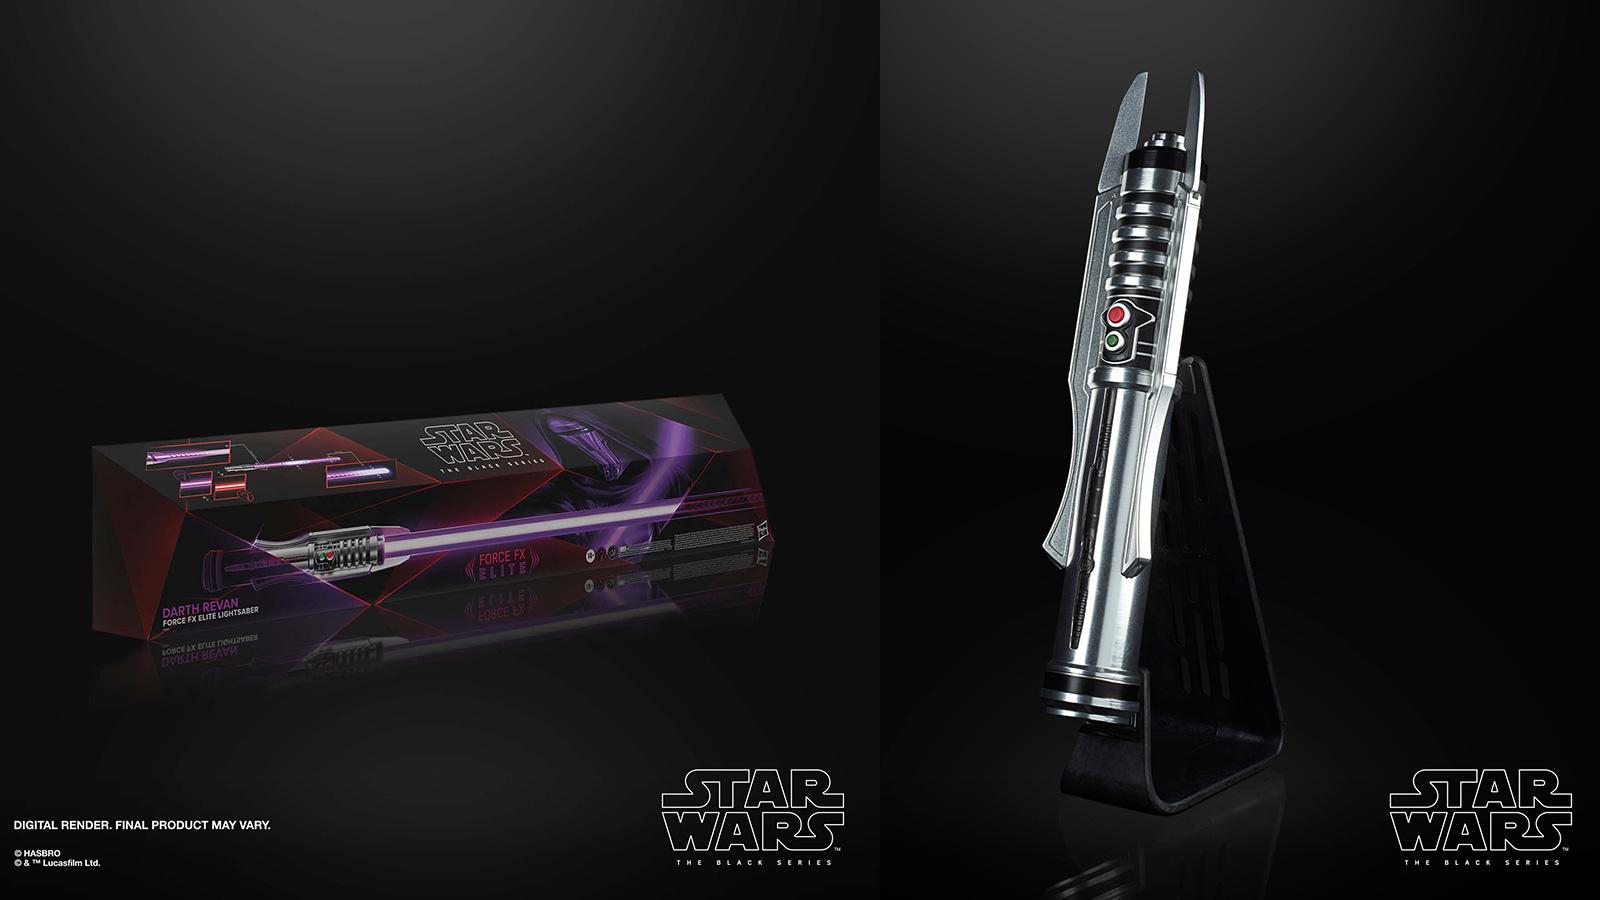 Press Release And Preorder Available - The Black Series Darth Revan's Force FX Elite Lightsaber